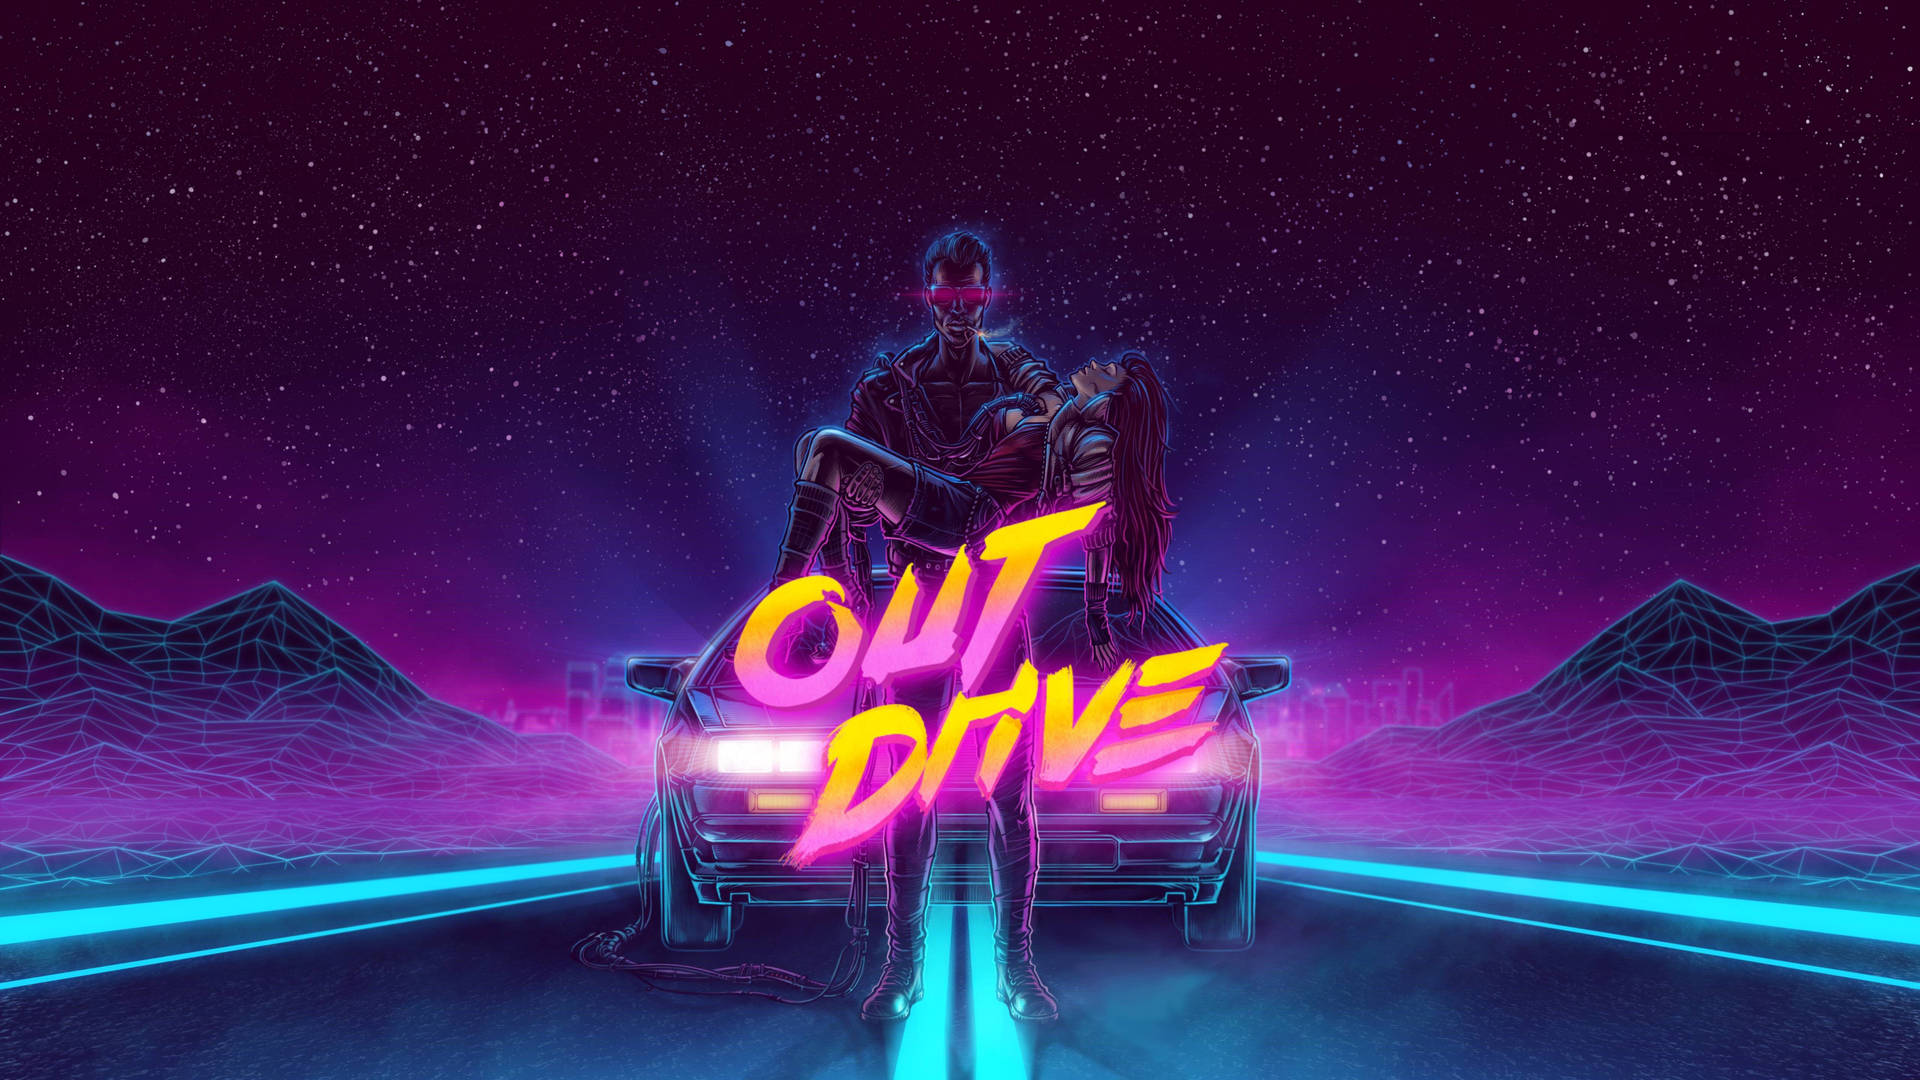 Outrun Out Drive Artwork Background